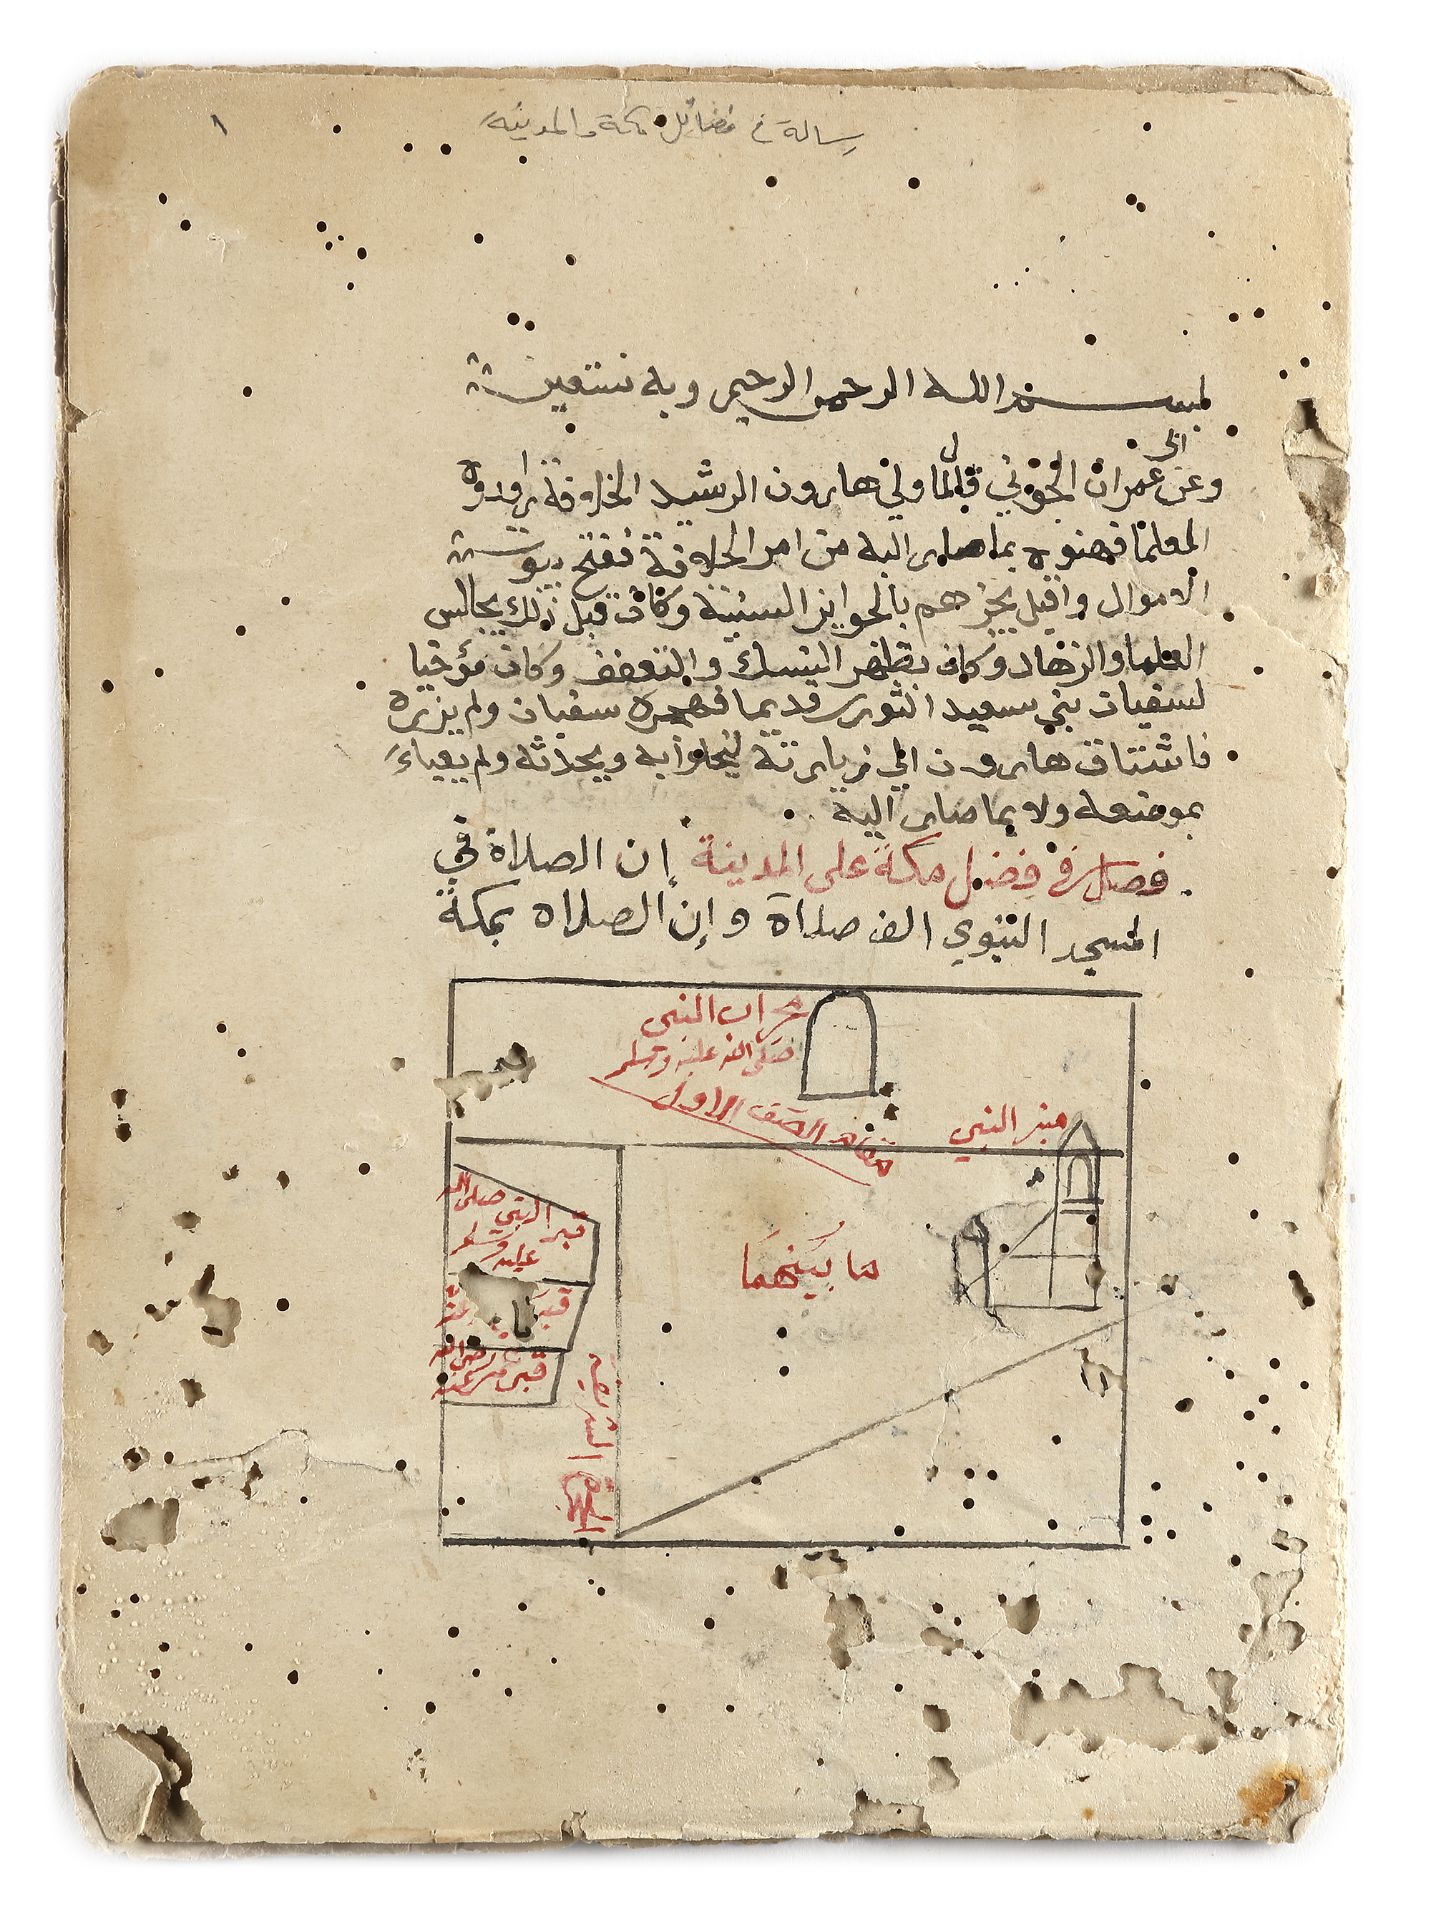 A CHAPTER ABOUT THE MERITS OF MECCA BY IBRAHIM IBN AHMED AL-SHAFI'I, IN MECCA AND DATED 1267 AH/1850 - Bild 2 aus 4